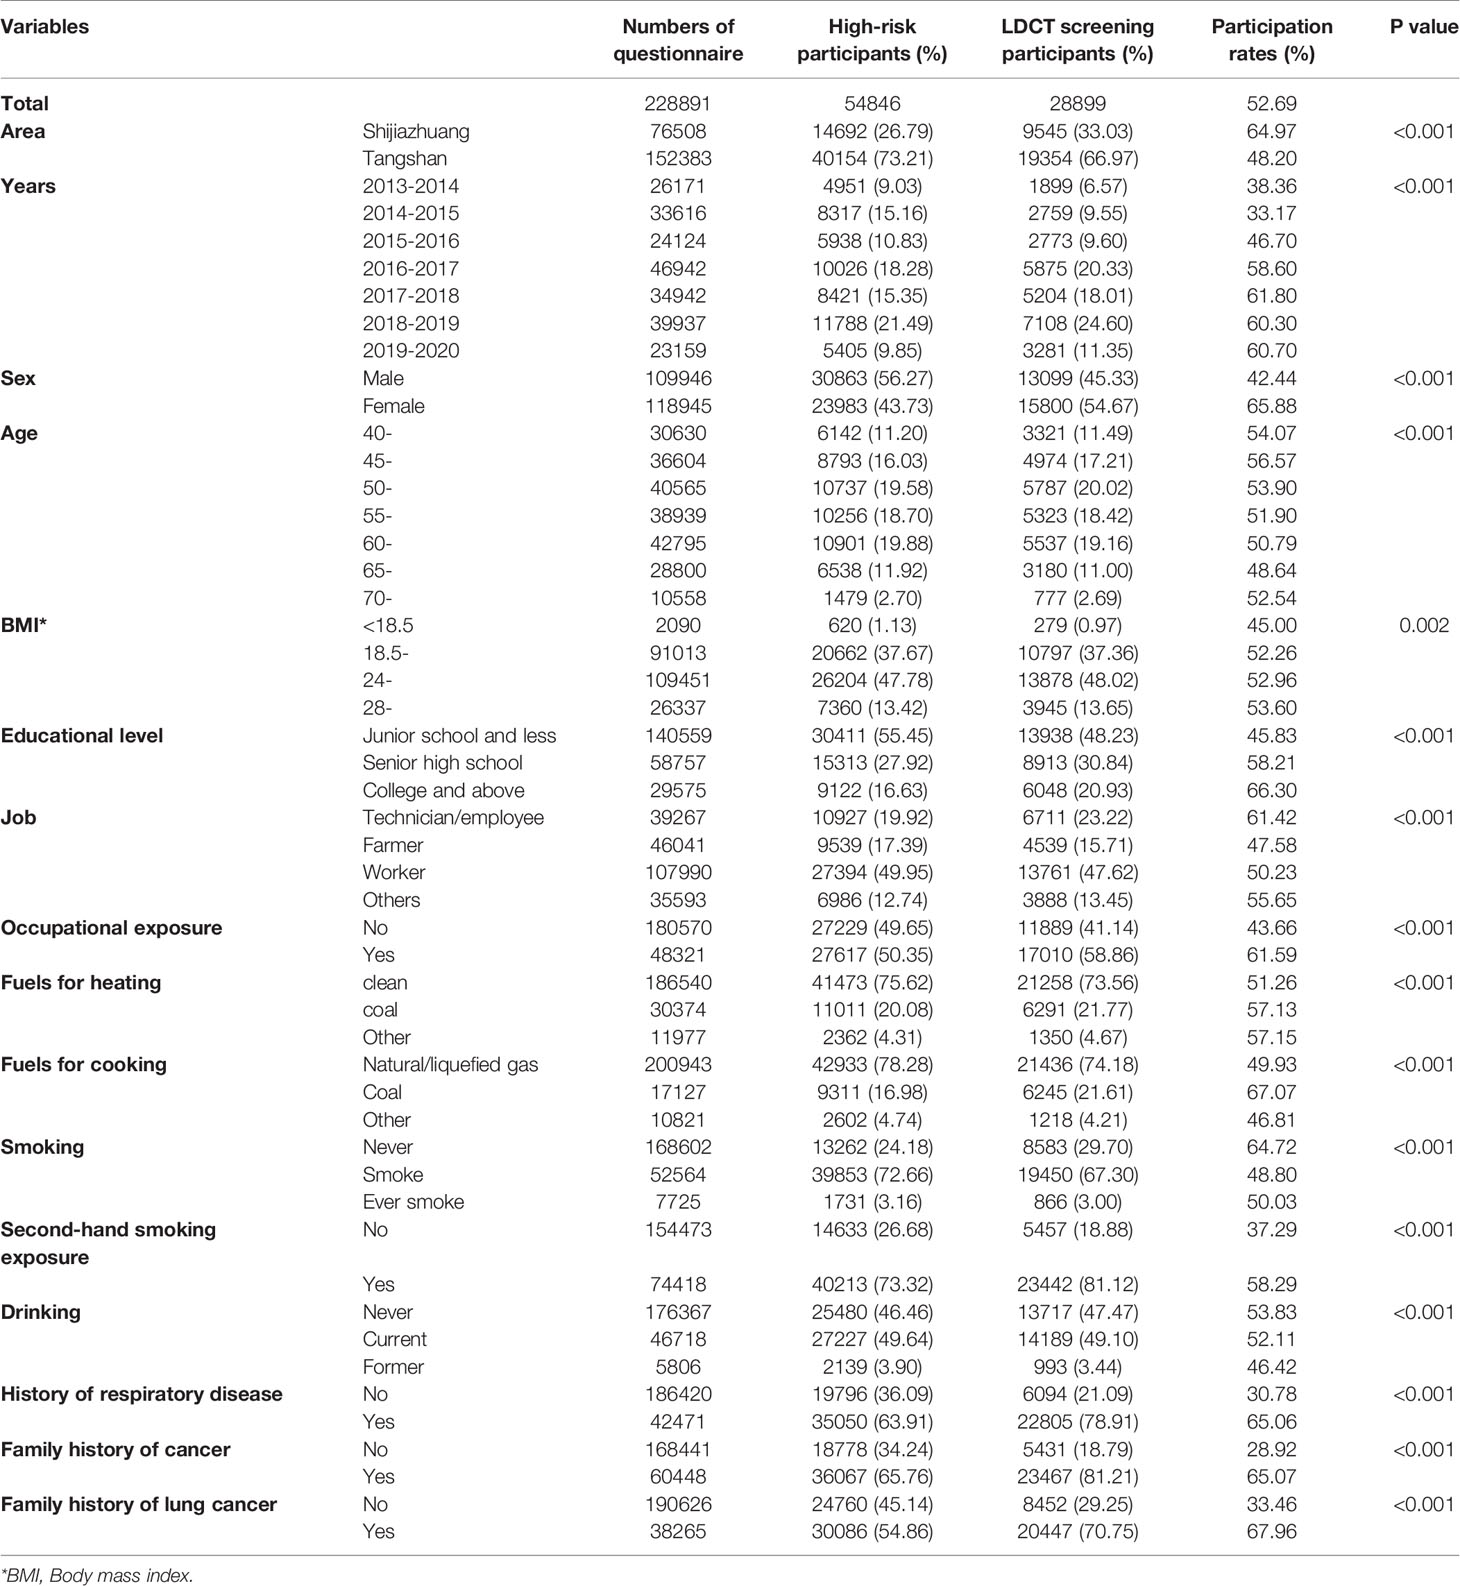 Frontiers | Participation and Yield of a Lung Cancer Screening 